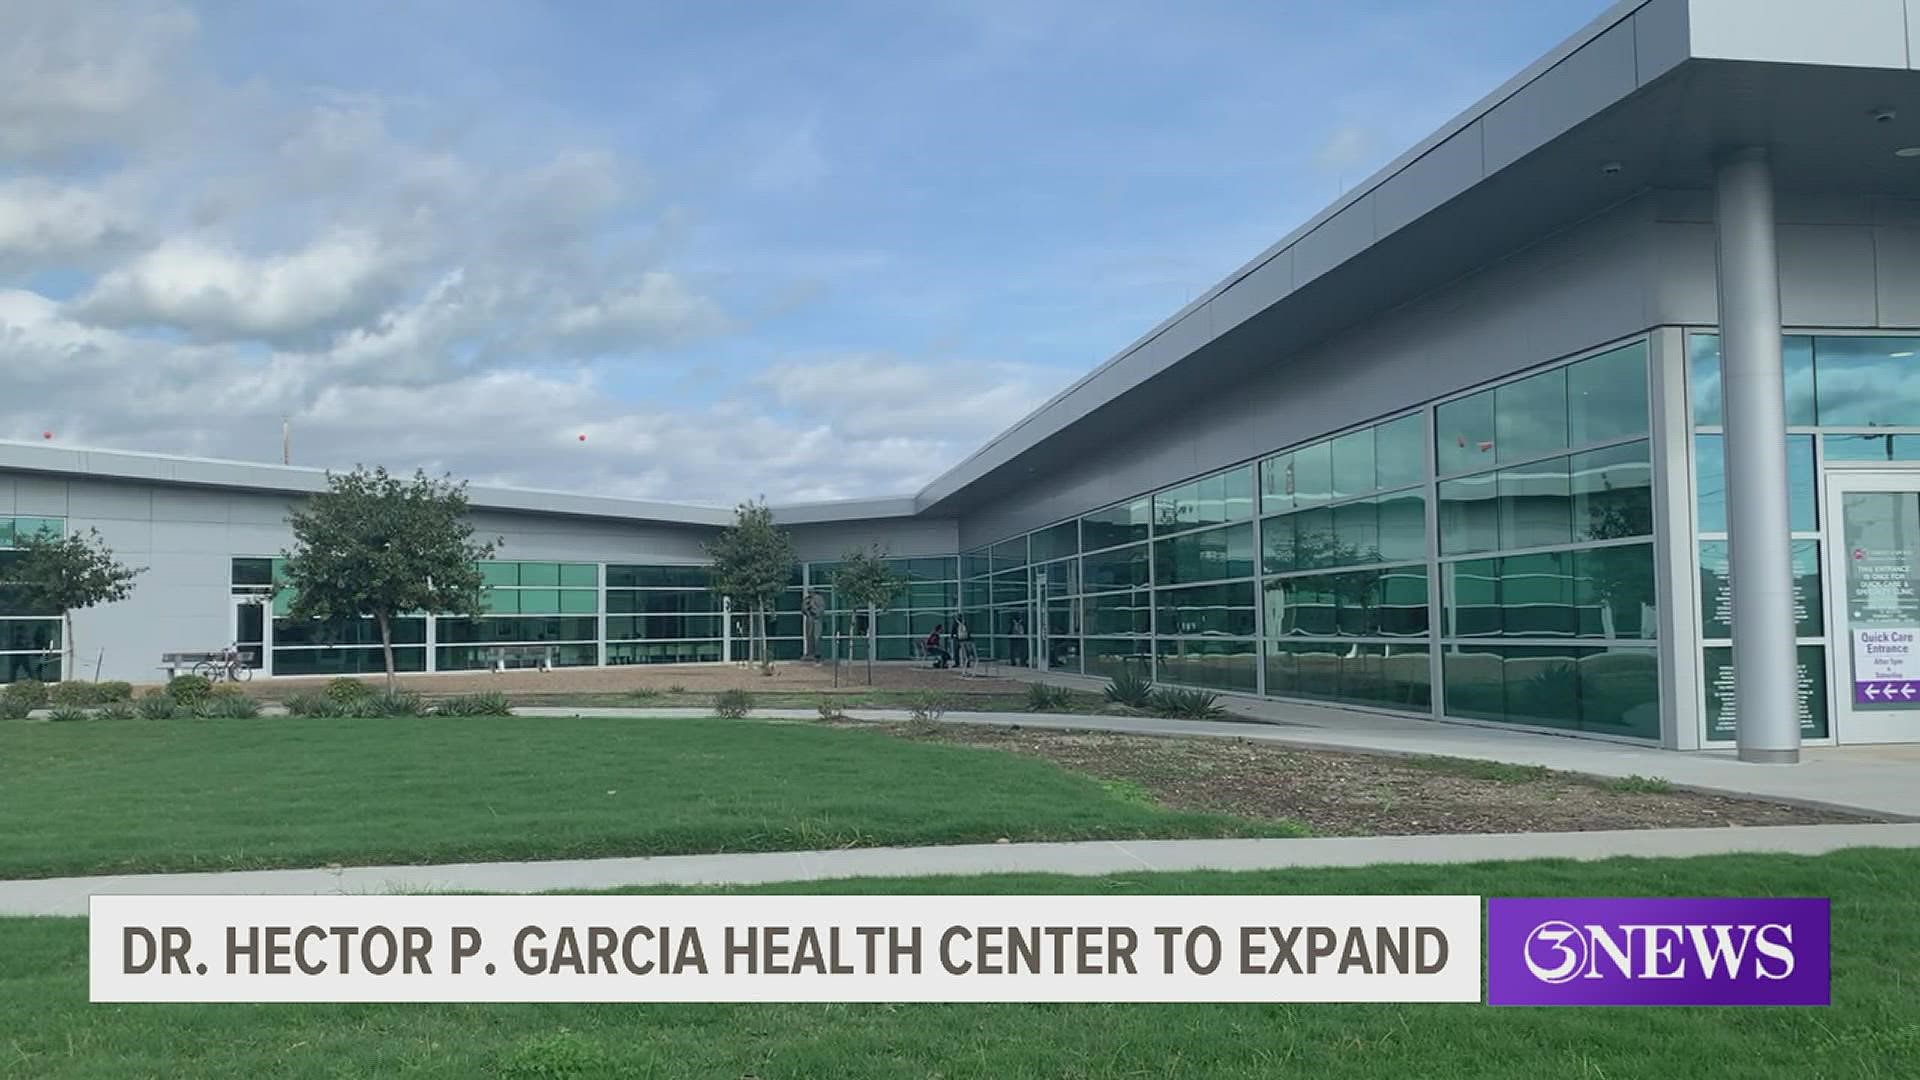 The Hector P. Garcia Health Center is growing, while the old hospital building is coming down.